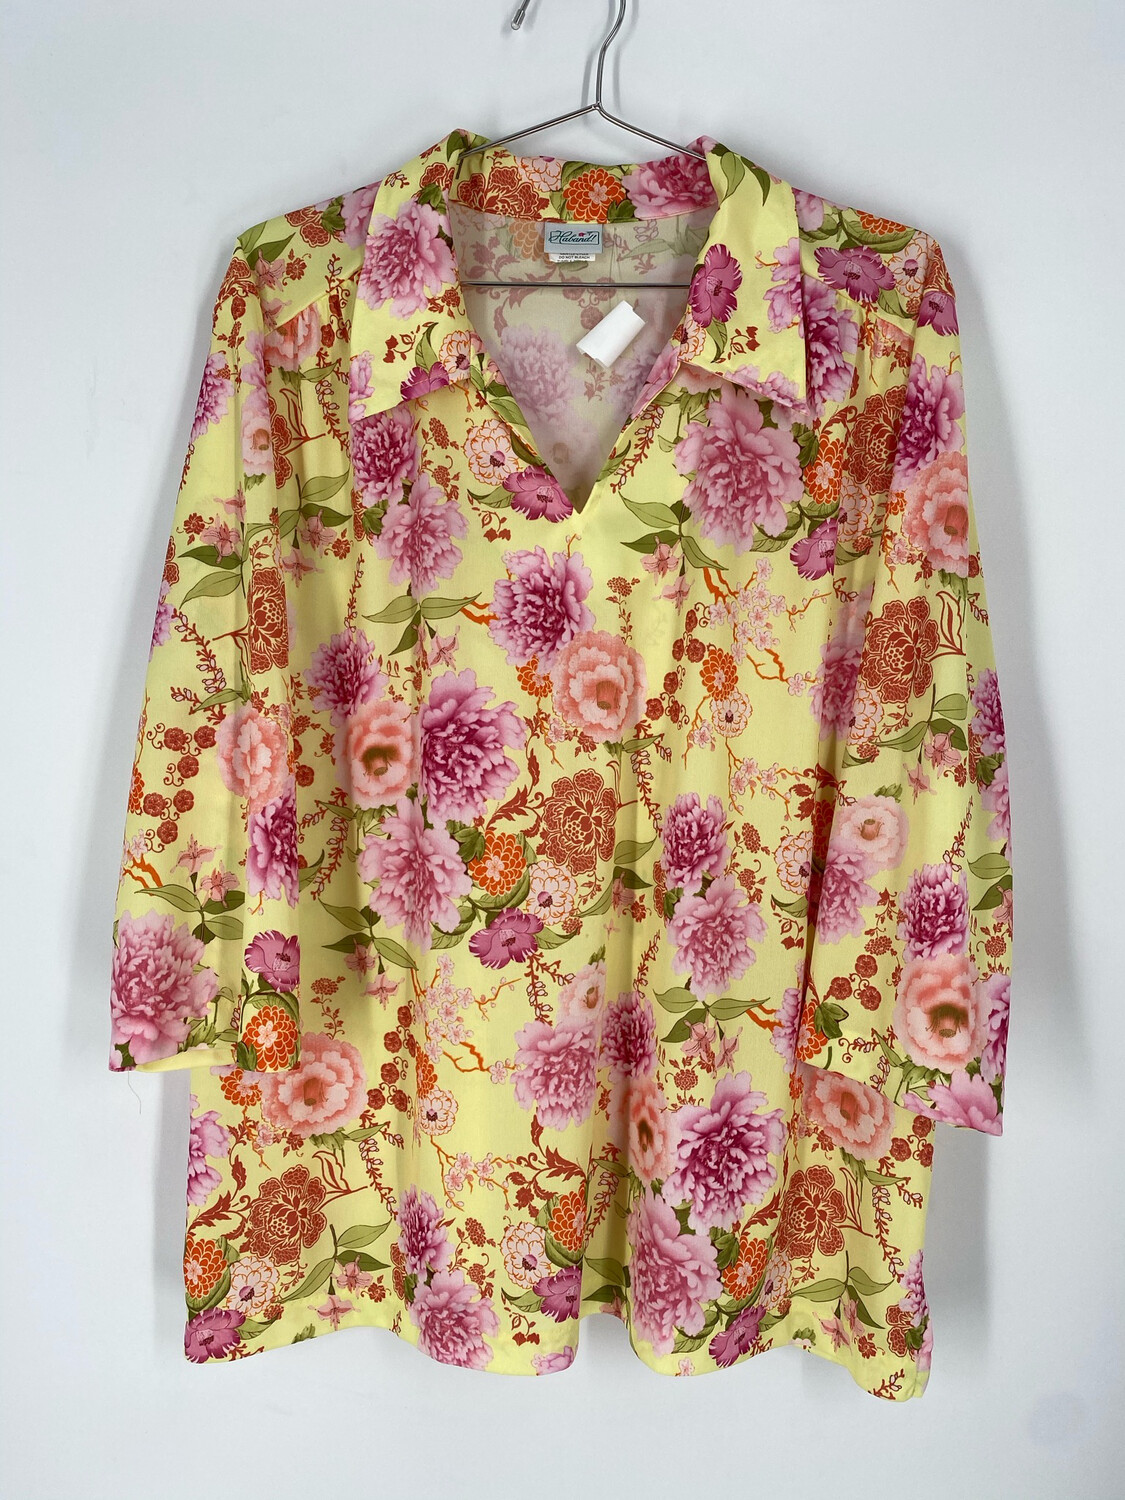 Haband! 3/4 Length Sleeve Floral Print Top Size 1X